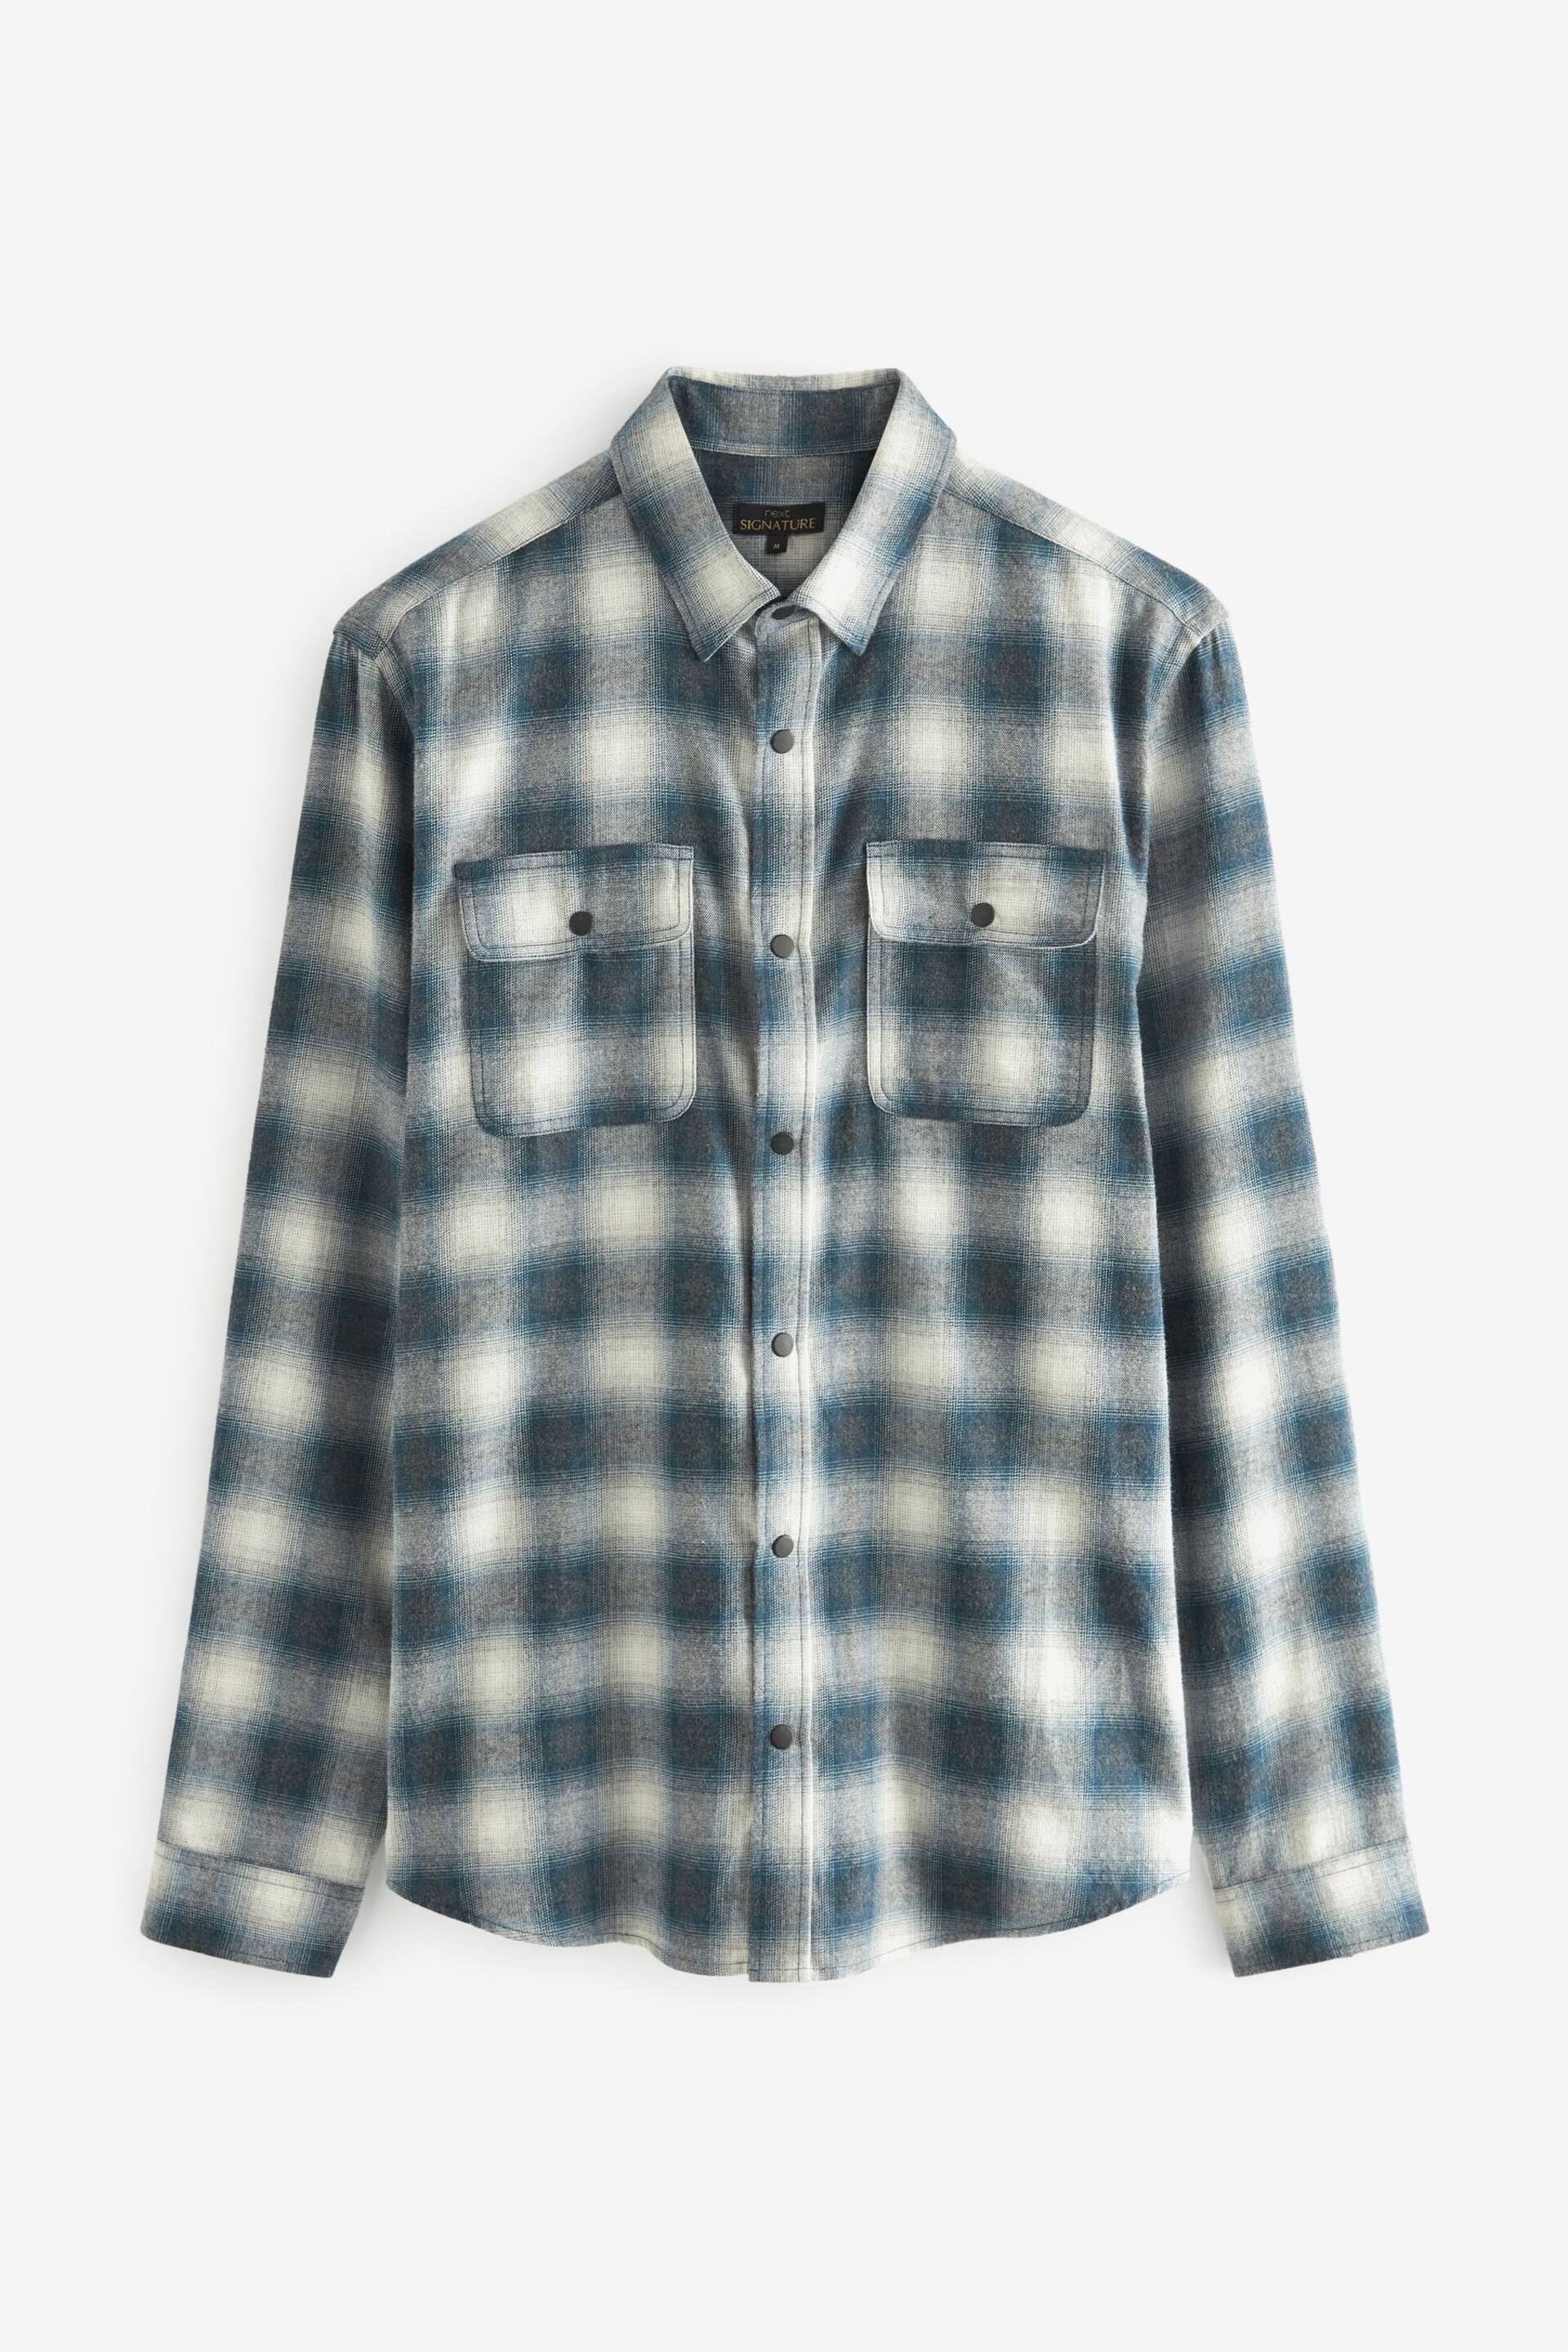 Grey/White Signature Brushed Flannel Check Shirt - Image 6 of 8